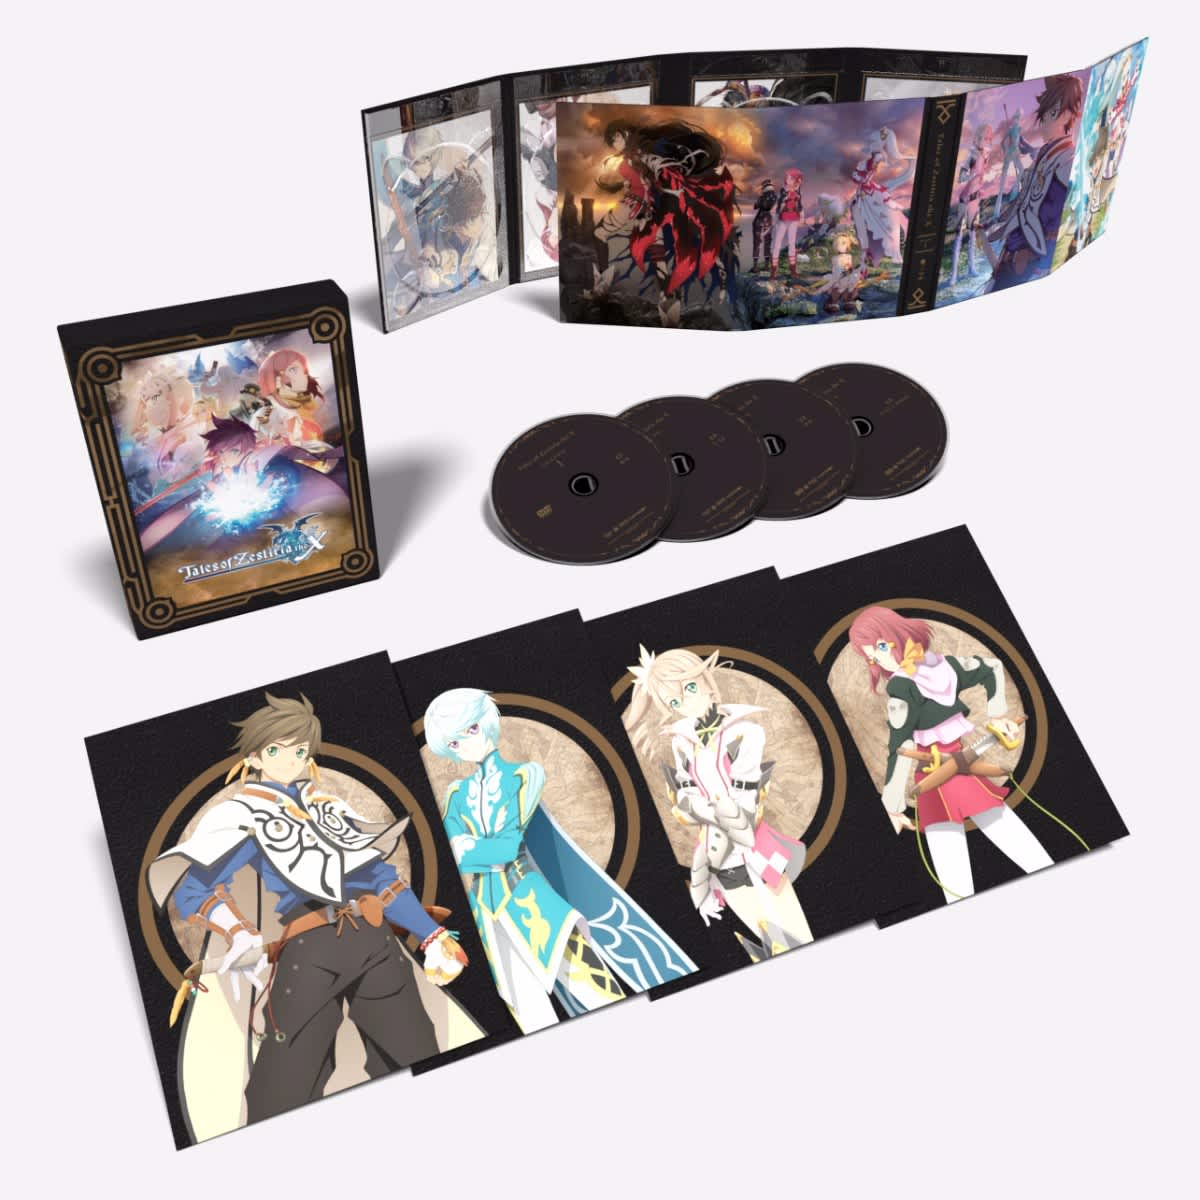 Tales of Zestiria the X: The Complete Series (Blu-ray + Digital